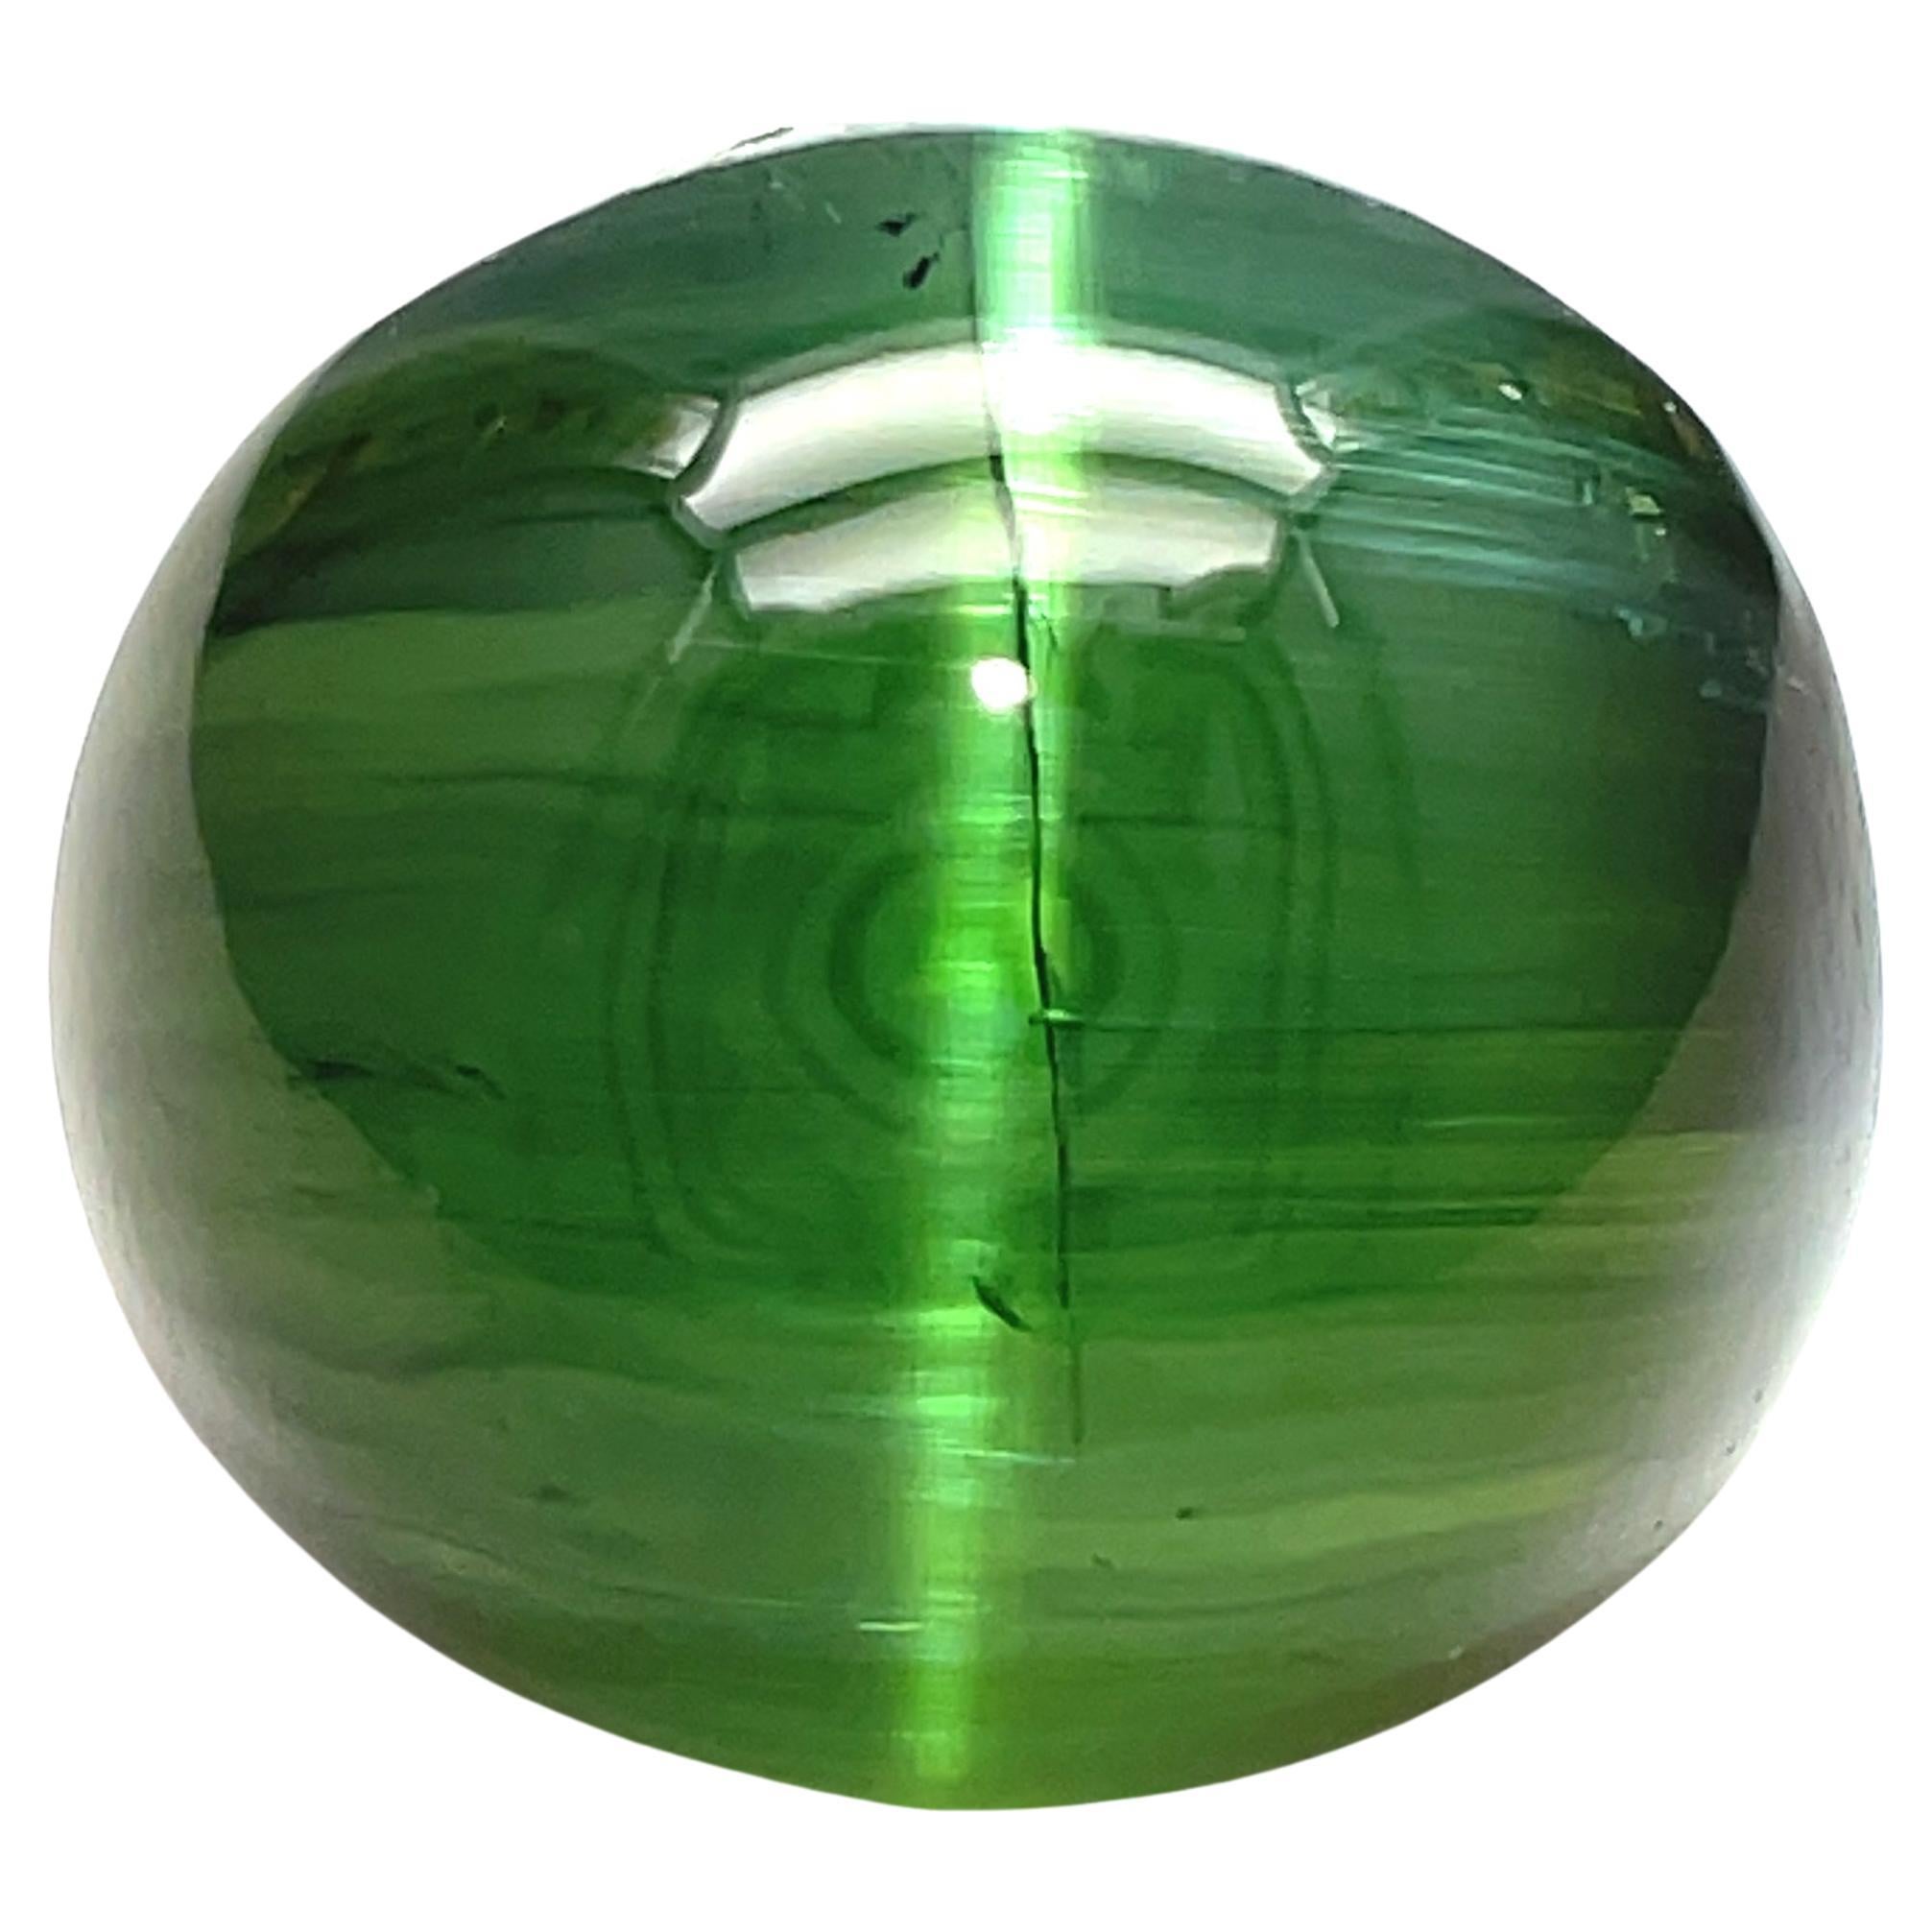 3.87 Carat Unset Loose Unmounted Oval Cat's Eye Green Tourmaline Gemstone For Sale